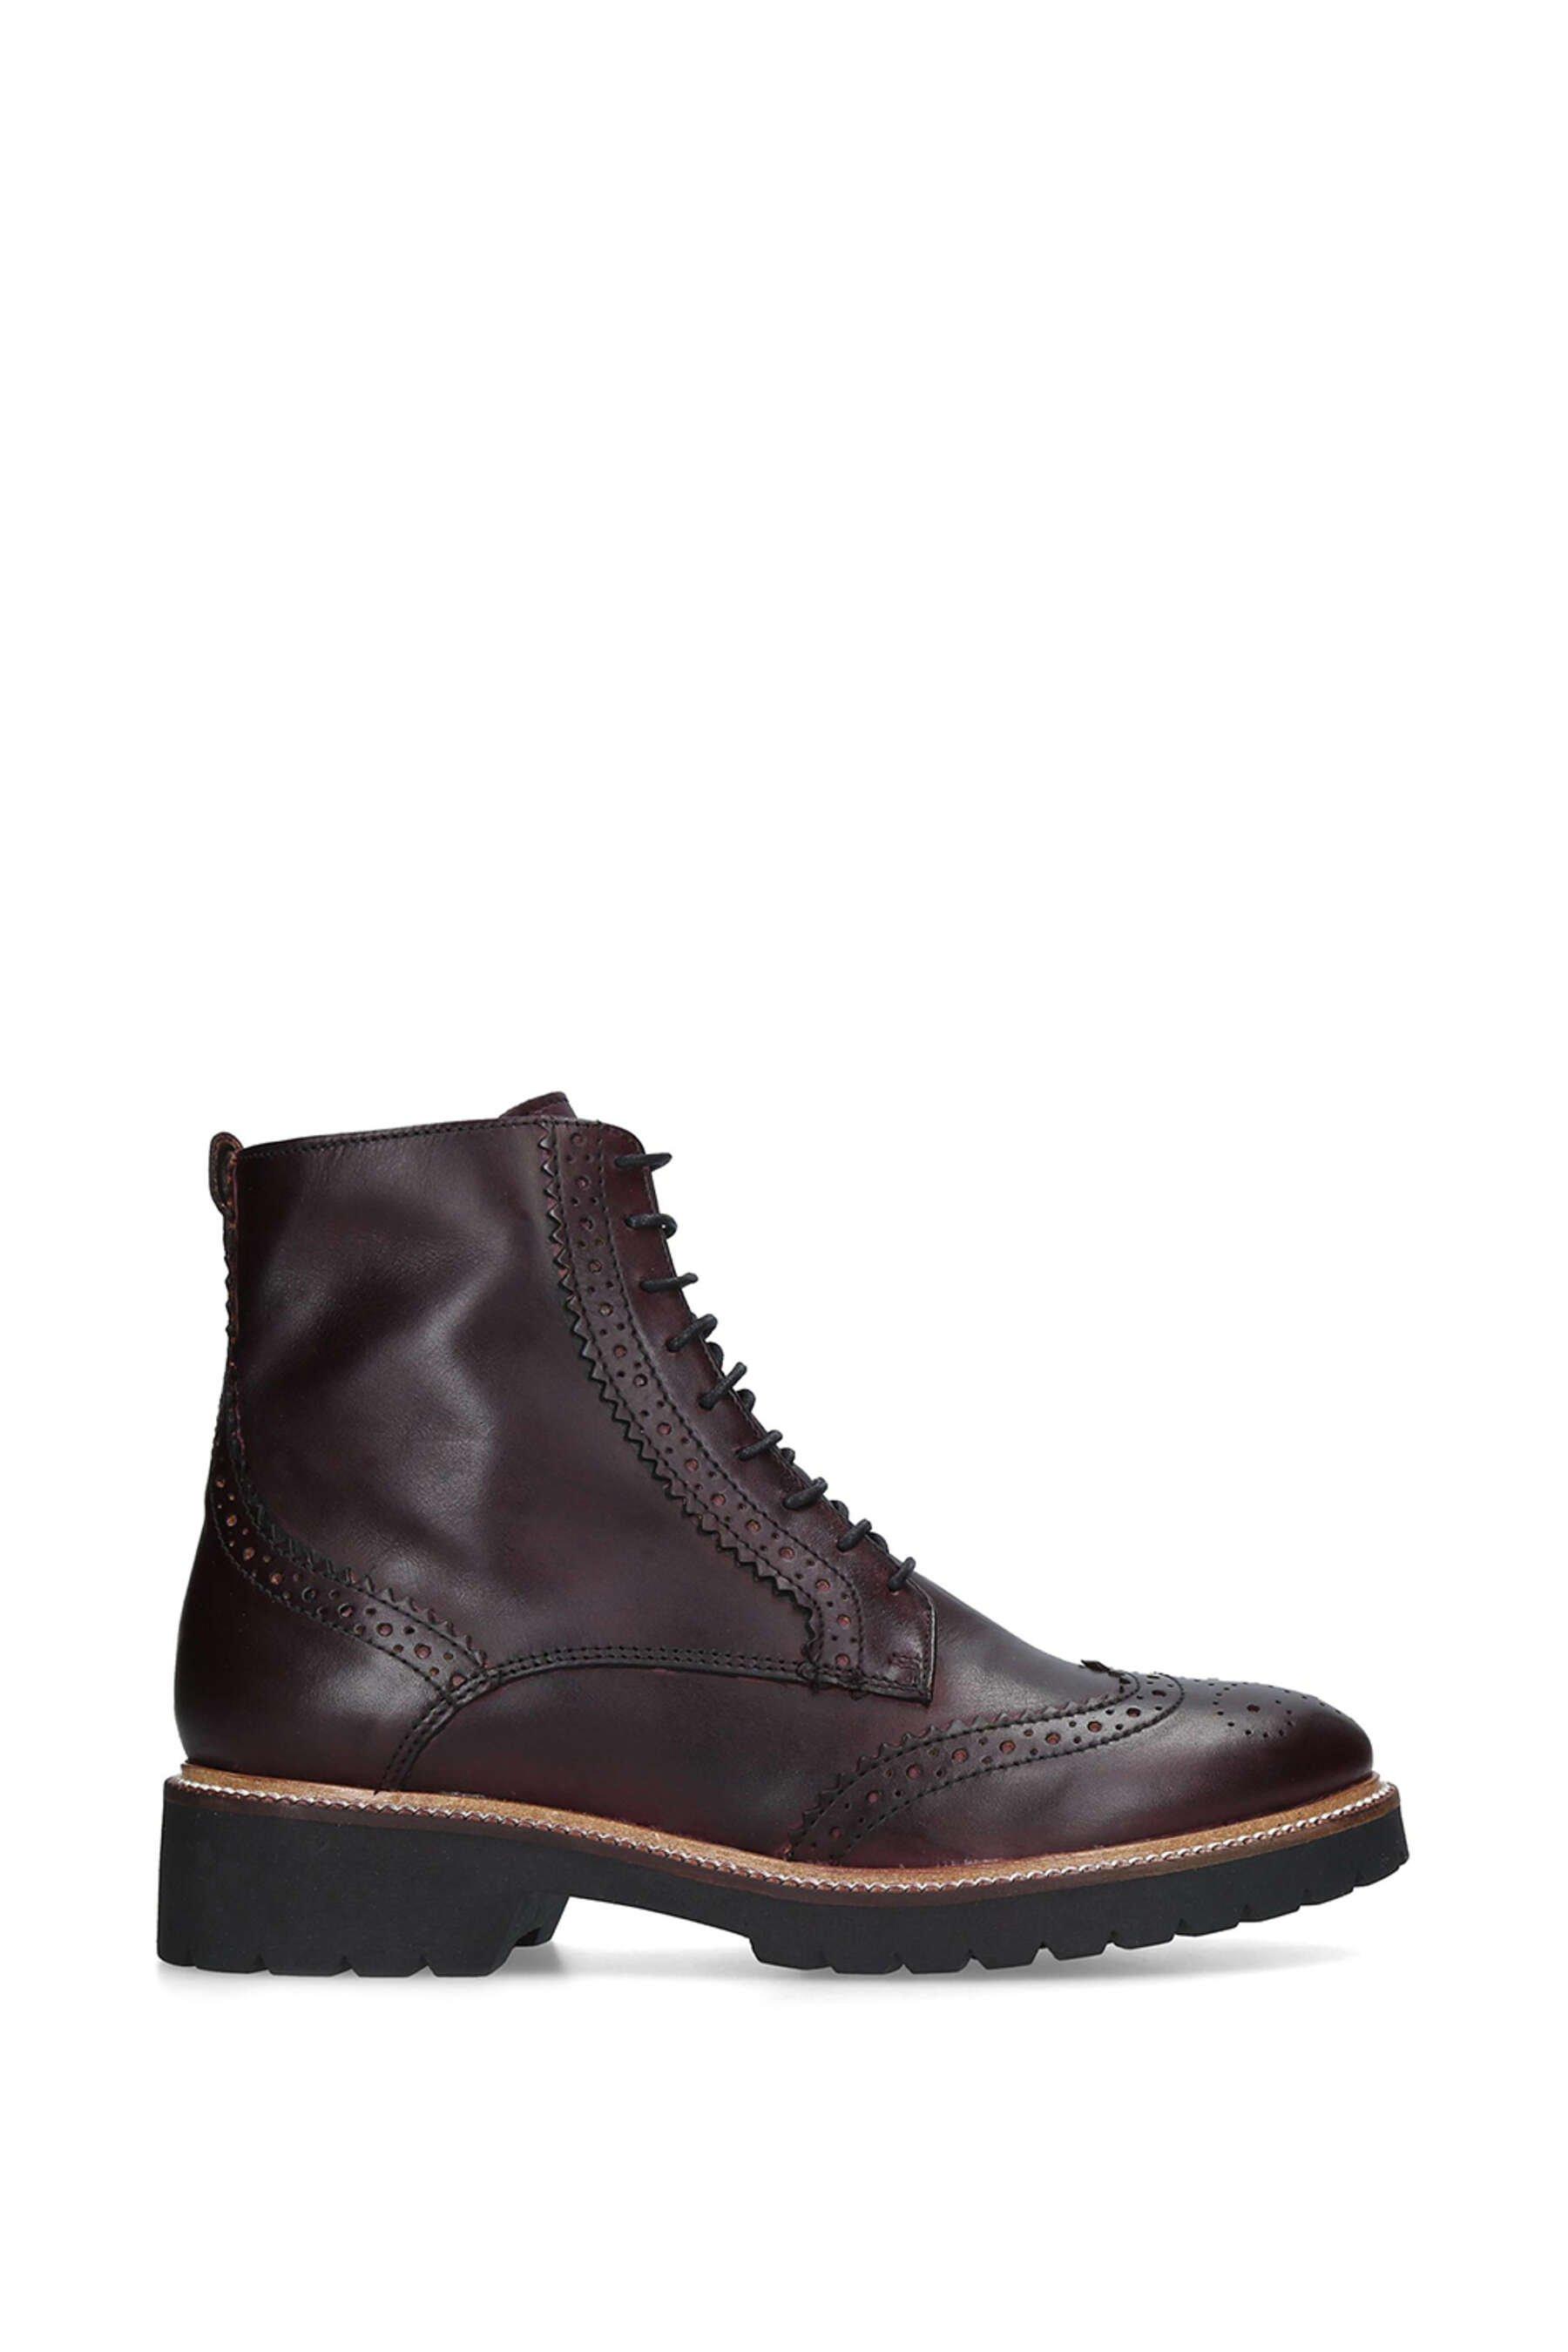 Boots | 'Snail' Leather Boots | Carvela